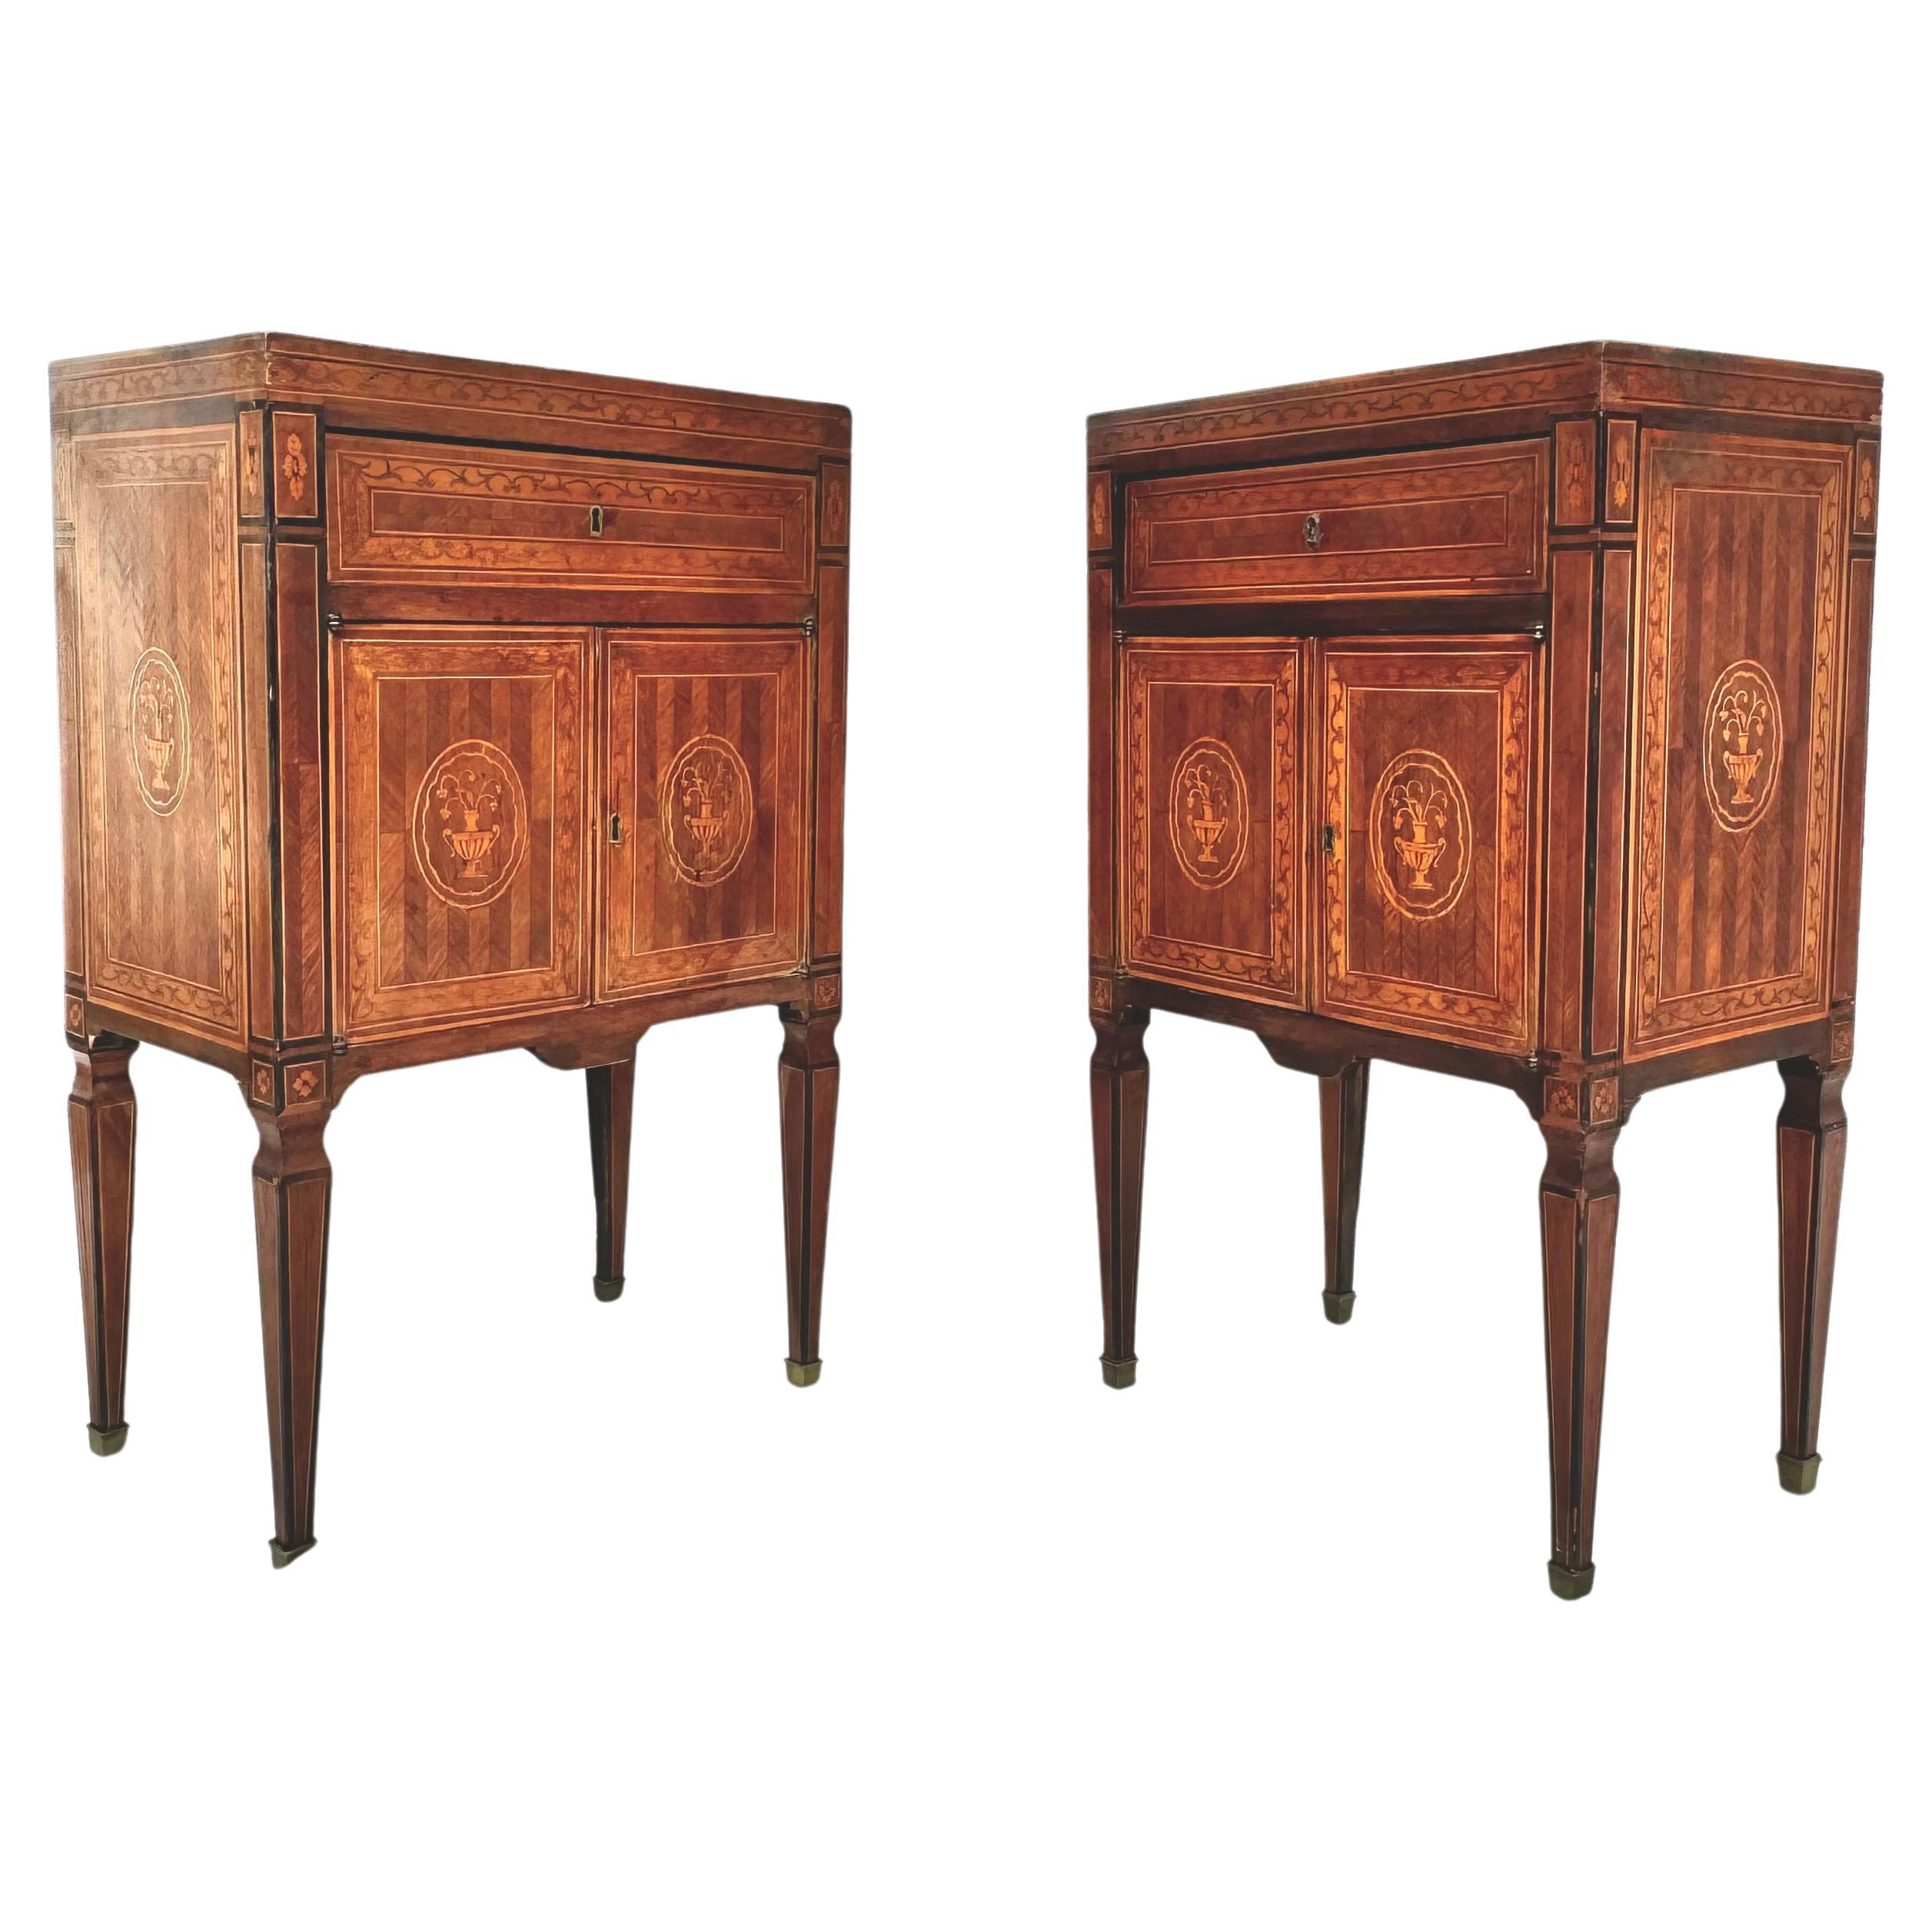 Pair Of  Italian Neoclassical Style Inlaid Bedside Cabinets For Sale